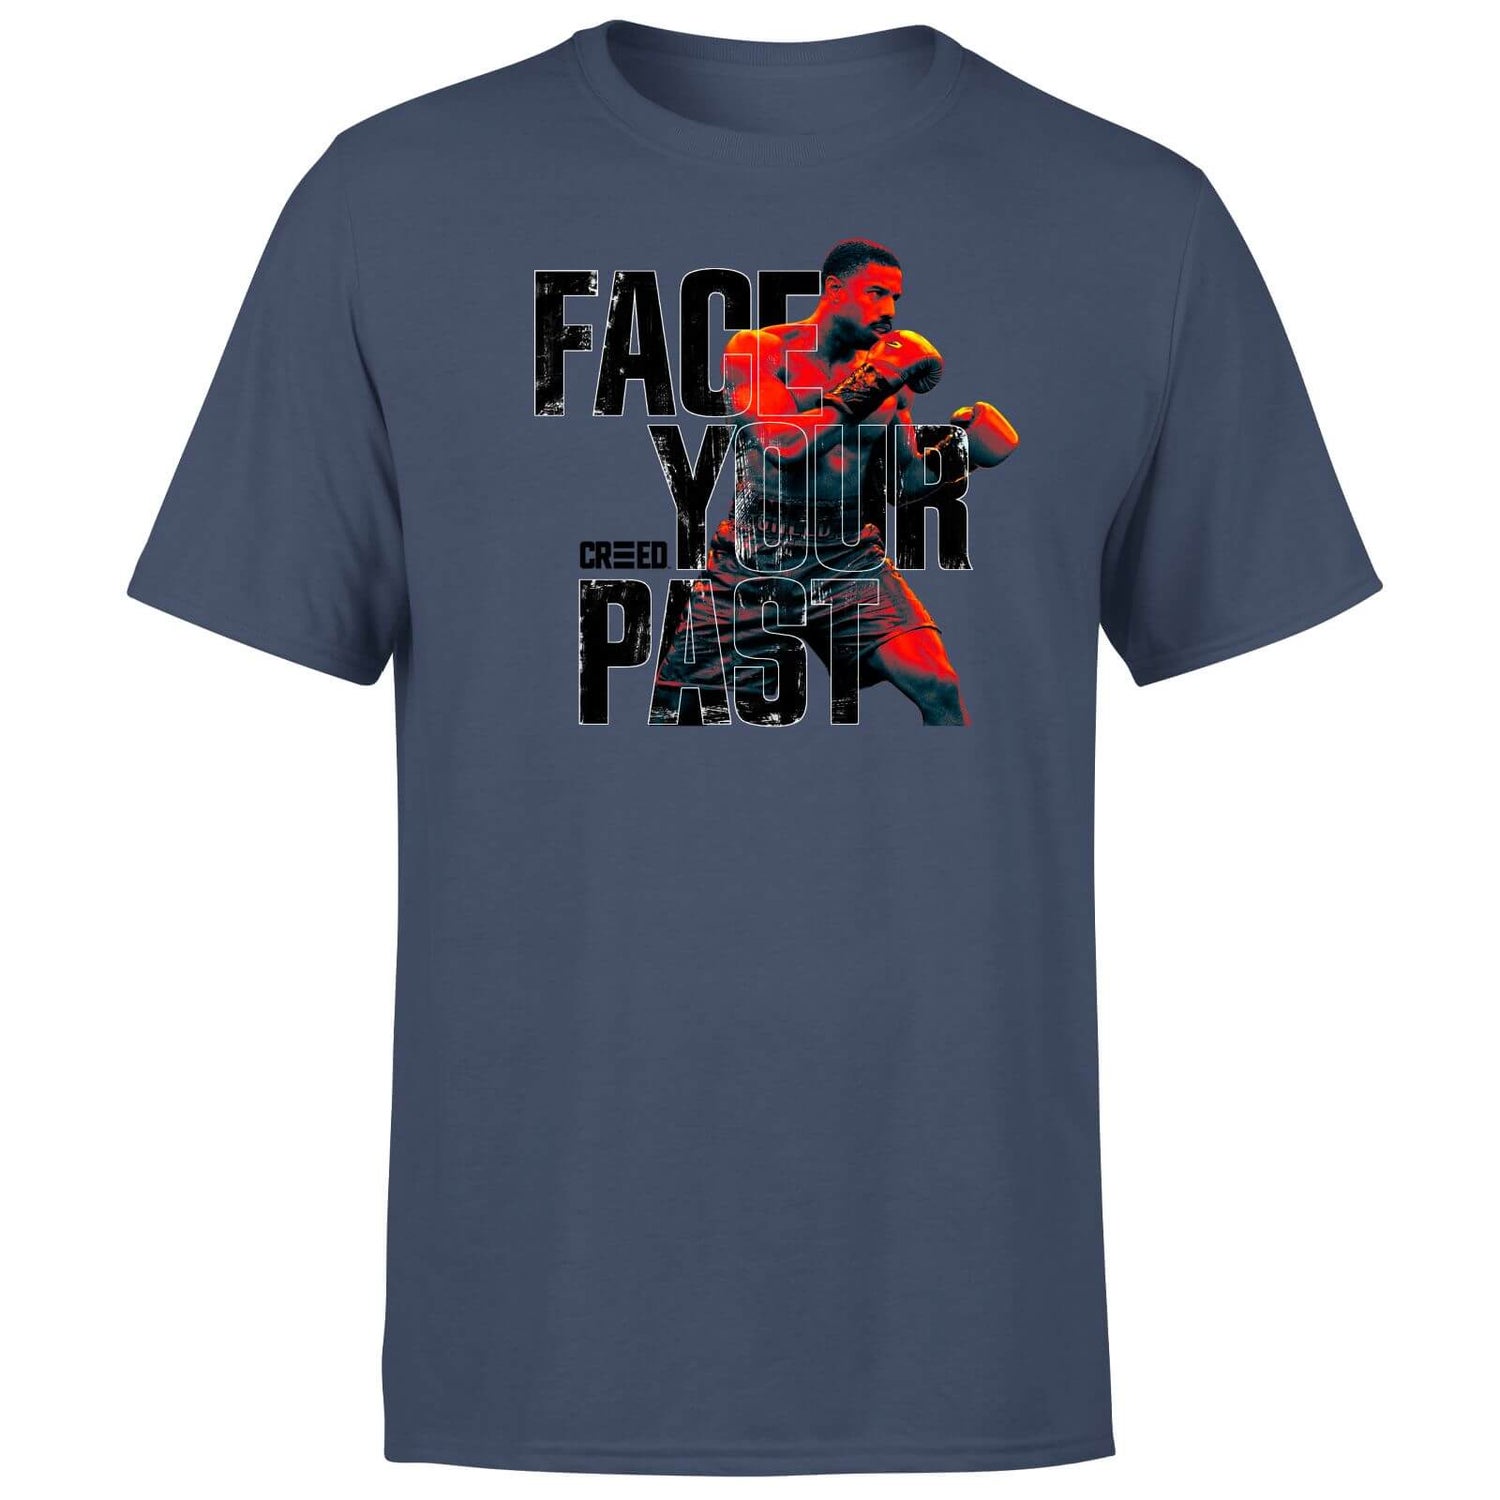 Creed Face Your Past Men's T-Shirt - Navy - XS